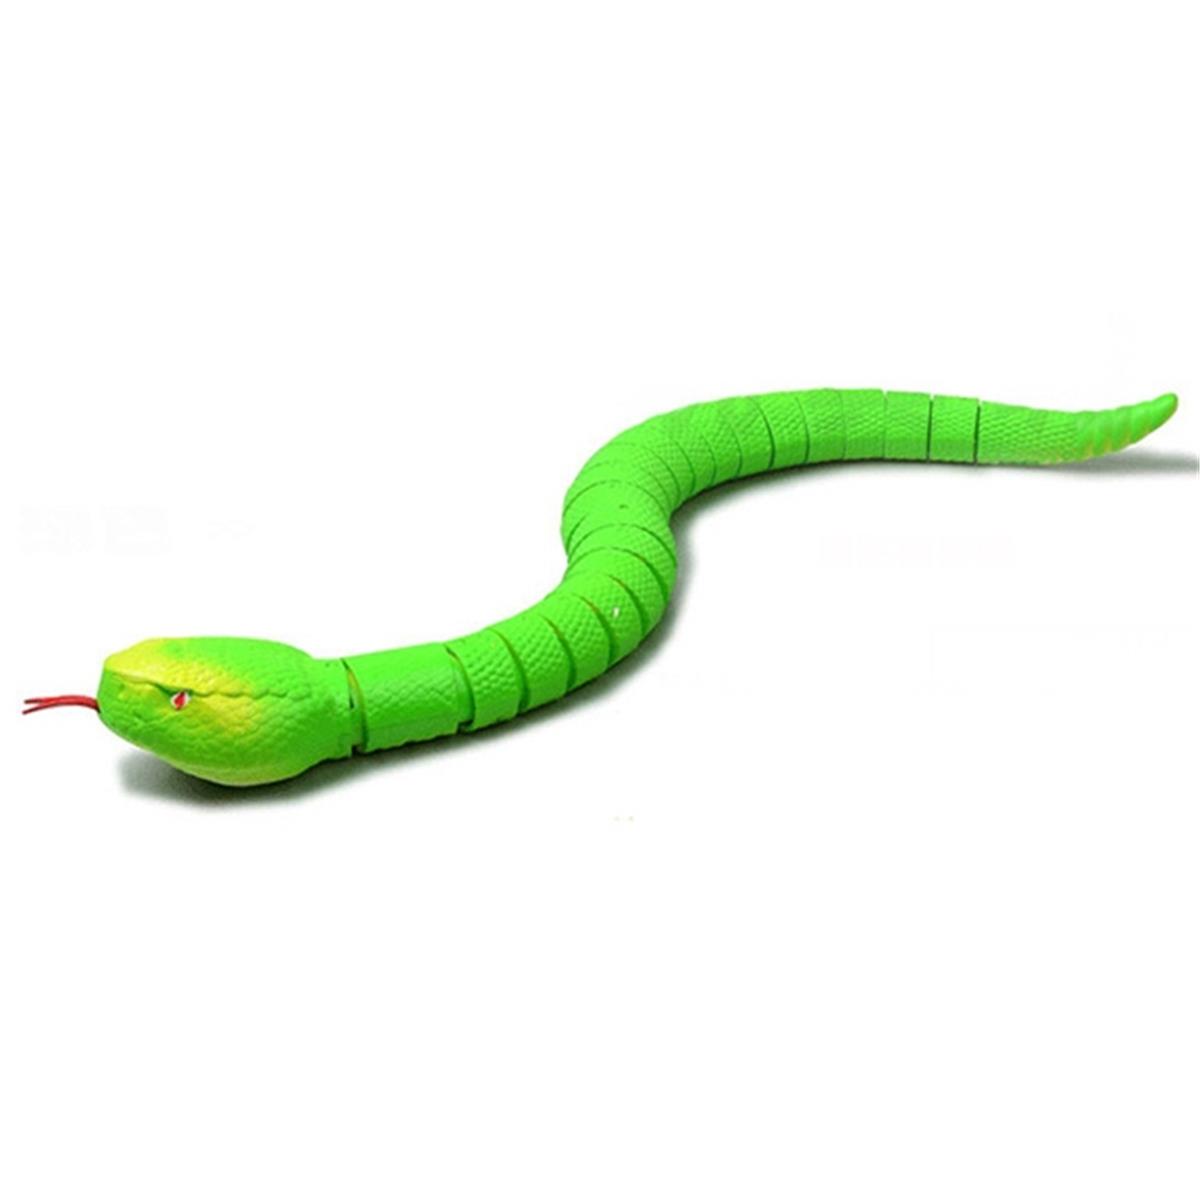 Picture of AZ Trading & Import RS9909 Green Realistic Remote Control Snake with Egg Shaped Controller - Green